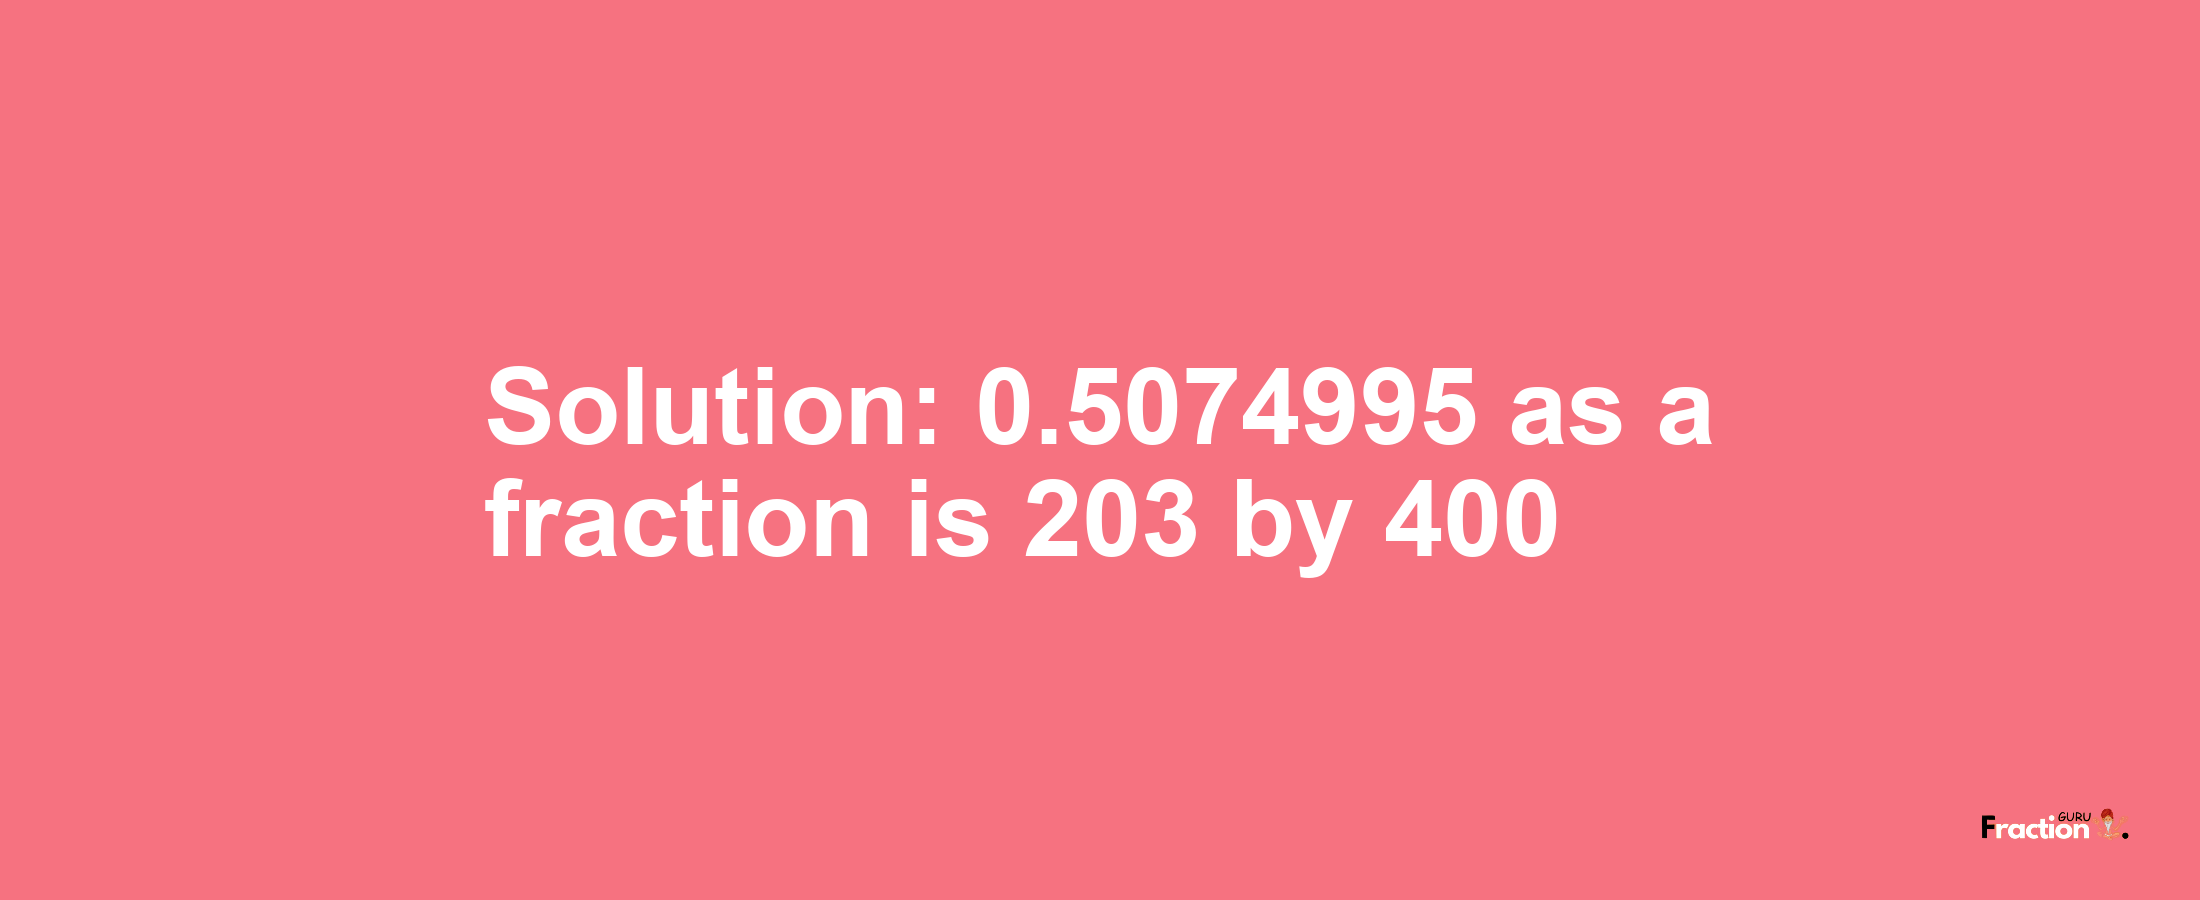 Solution:0.5074995 as a fraction is 203/400